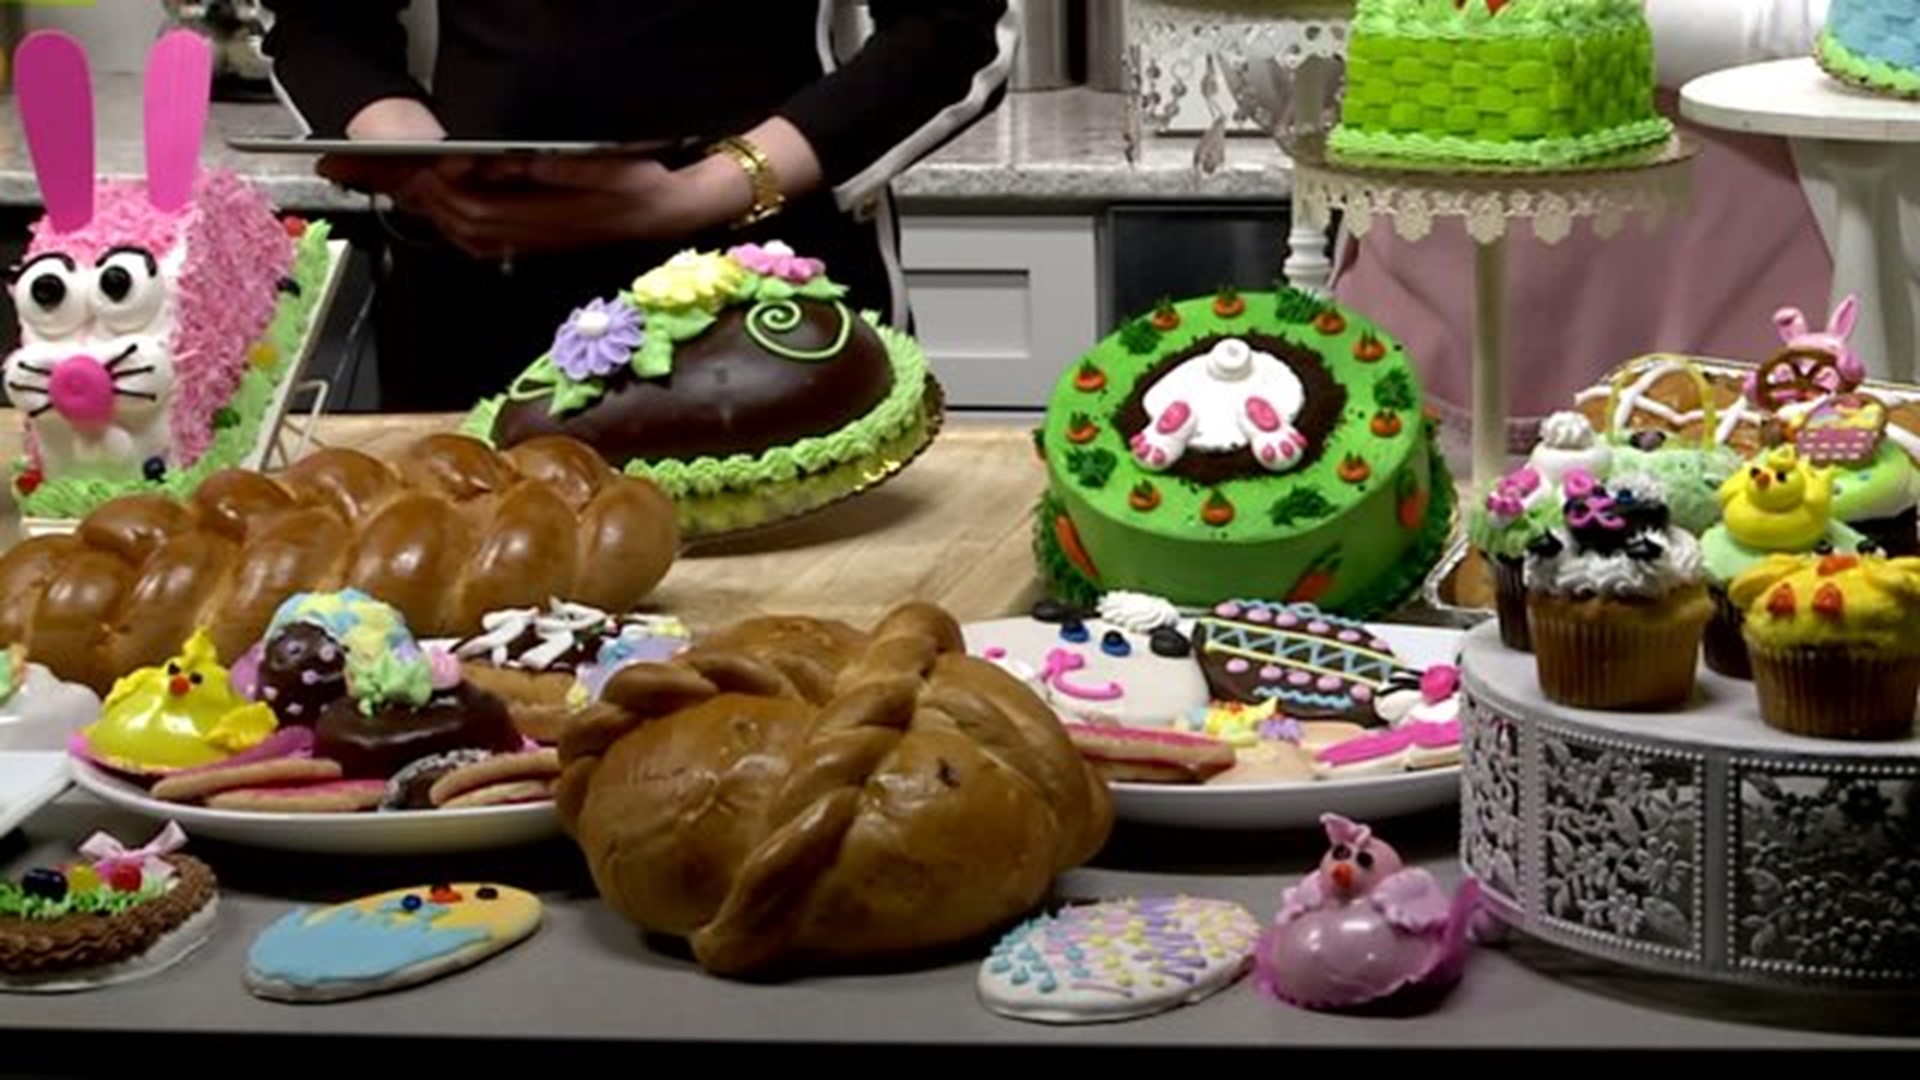 Pennsylvania Bakery graces the set with Easter goodies